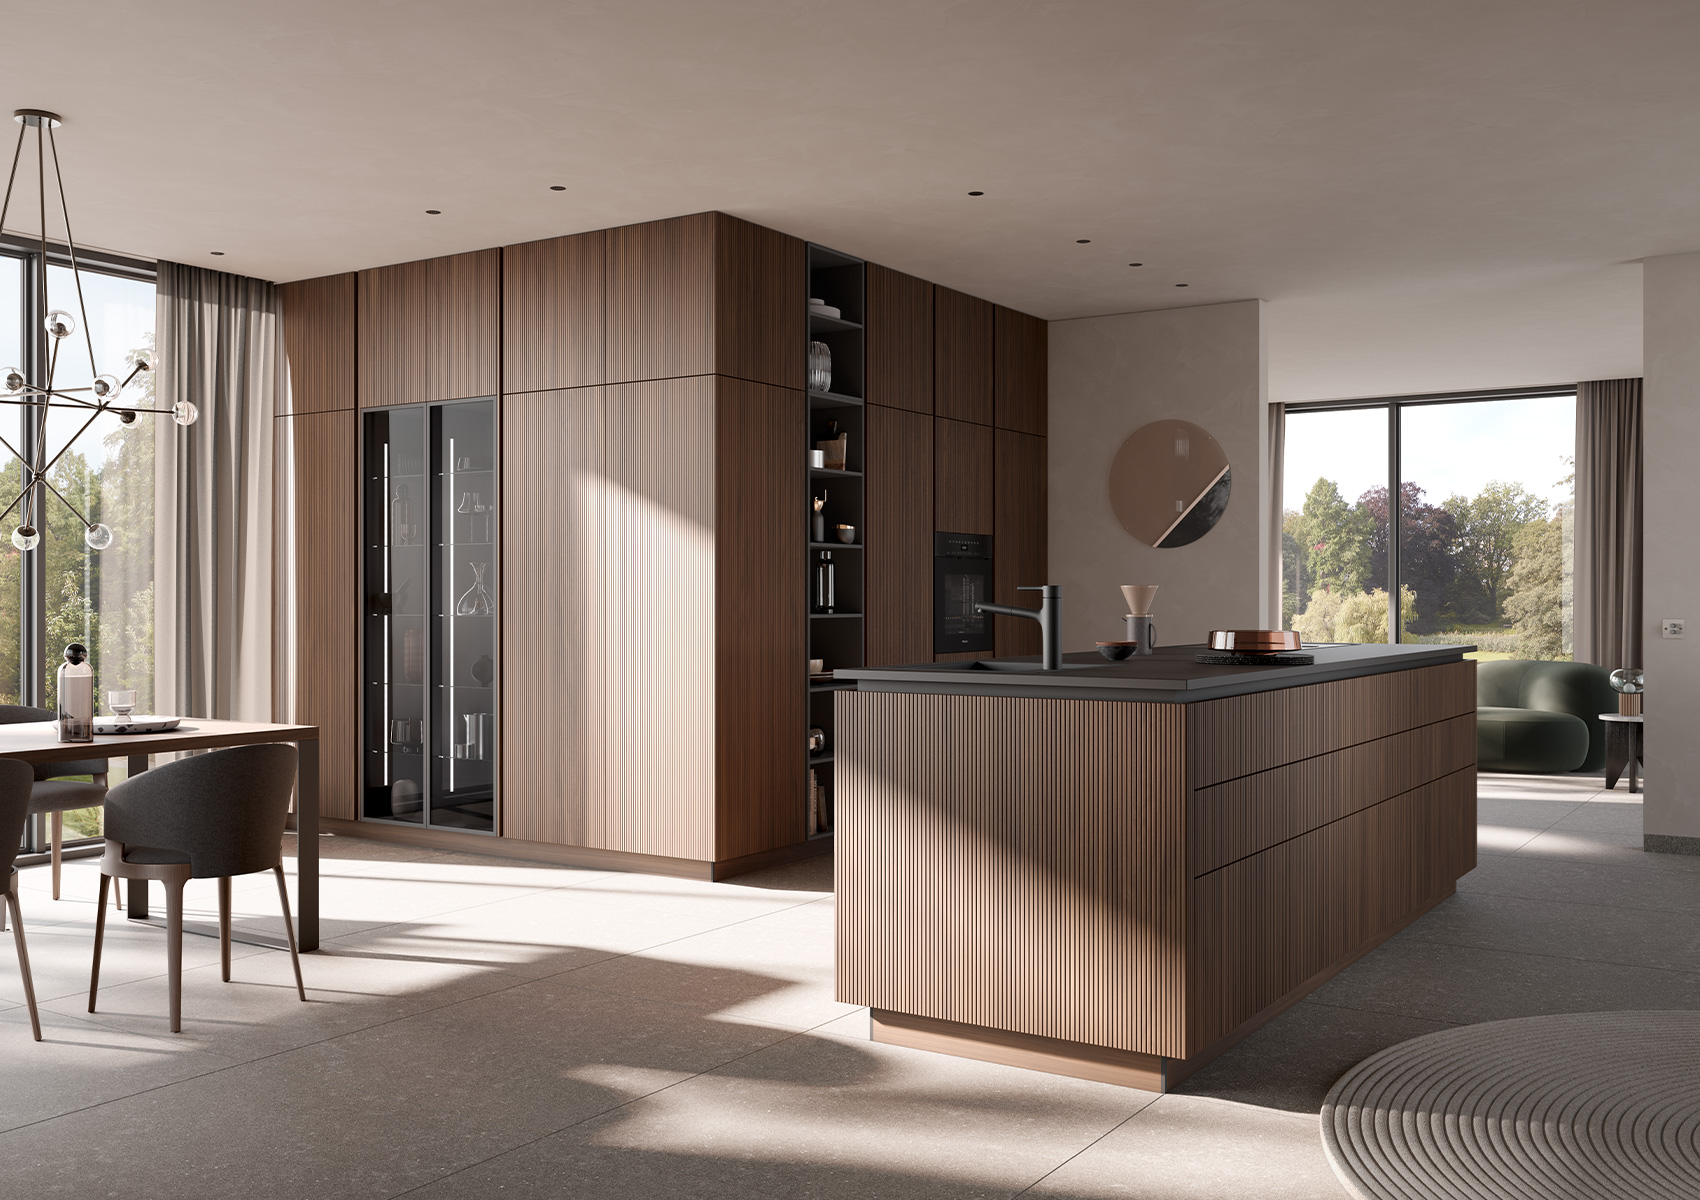 Over-corner view of the kitchen composition with elegant walnut fronts with focus on the glass tall cabinet element